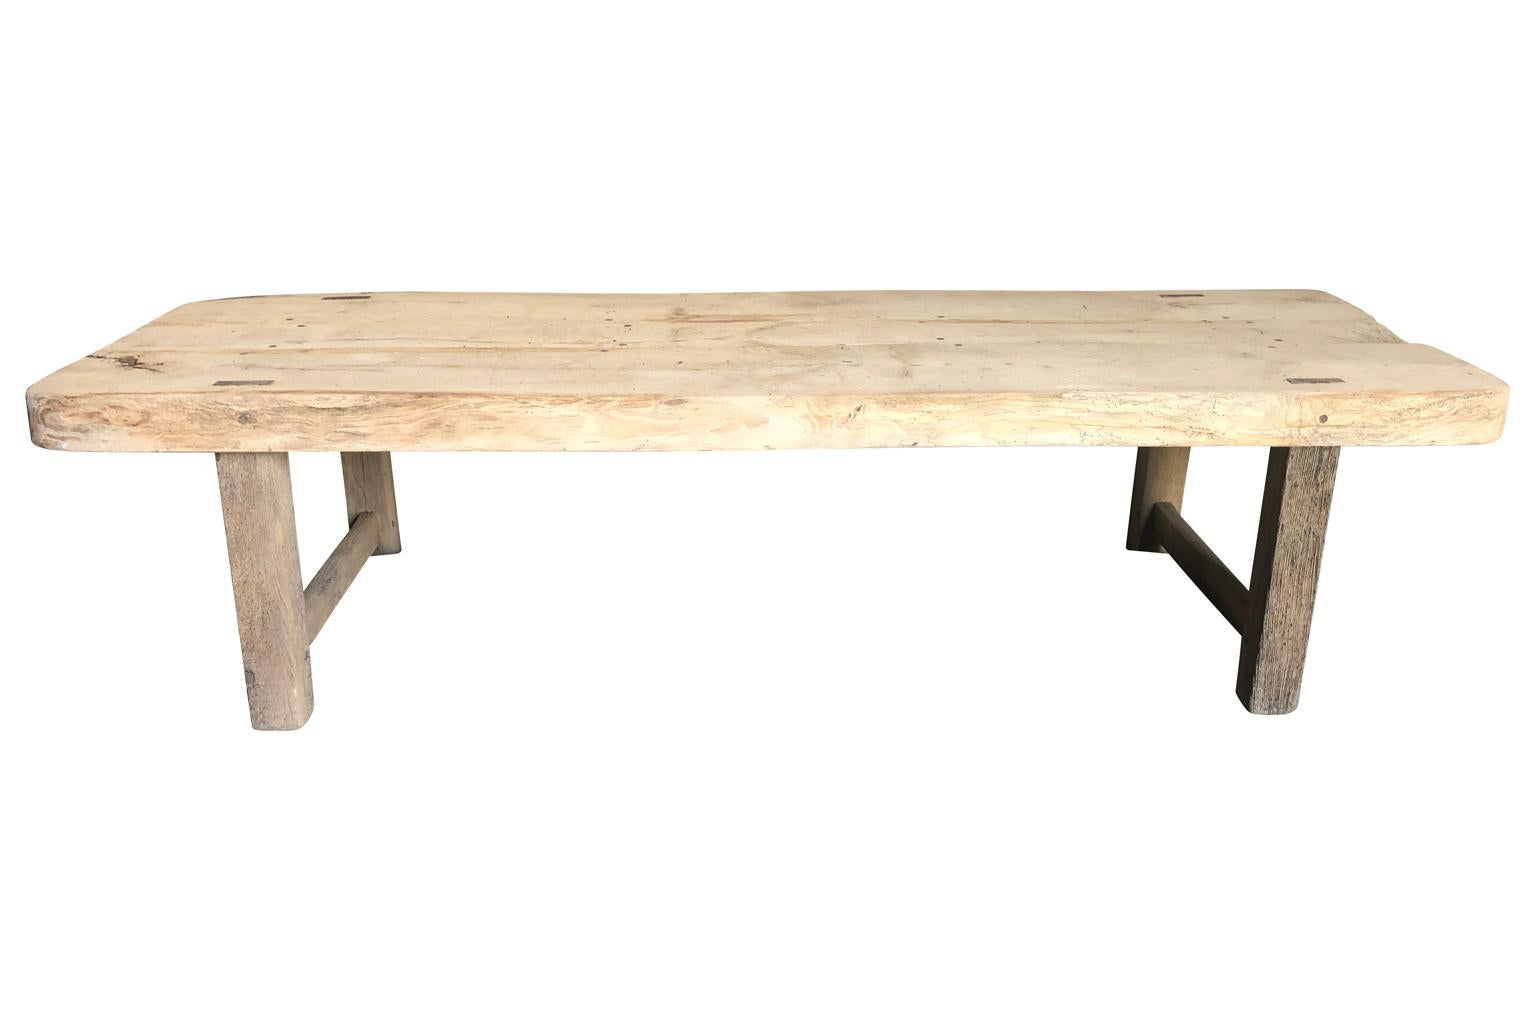 A monumental primitive farm table from the Provence region of France. Wonderfully constructed from sturdy oak with a massive thick top, legs and stretchers. Perfect for large gatherings for any casual interior or exterior dining areas. Great